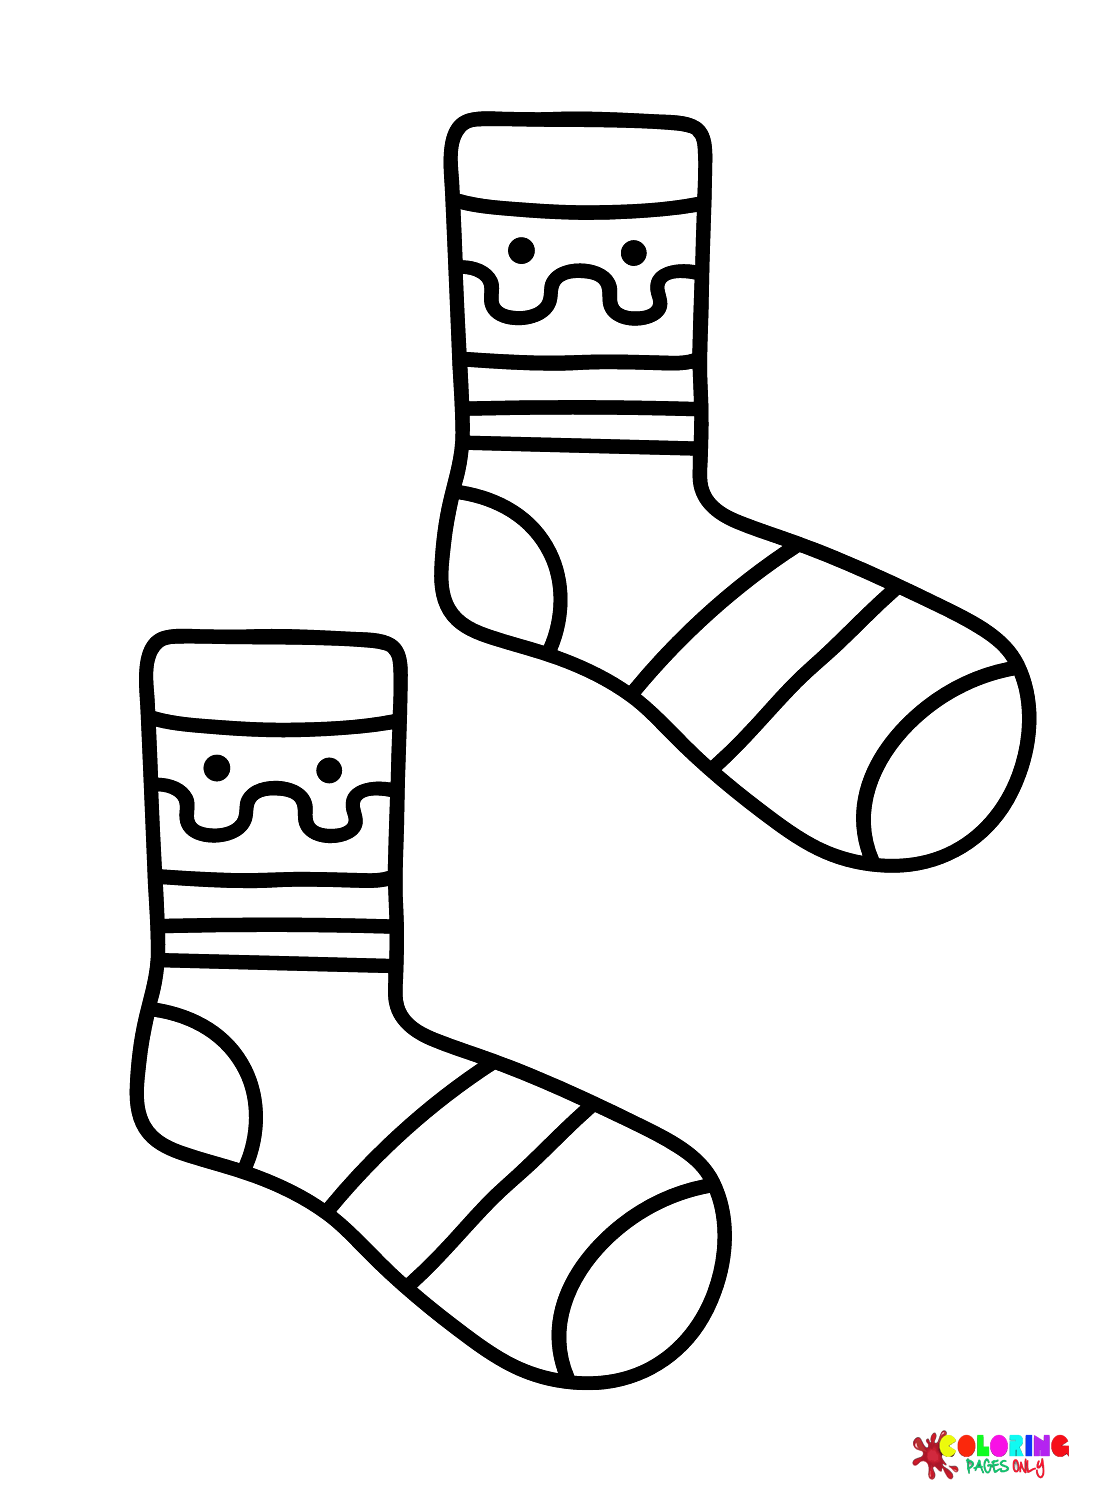 Socks for Children Coloring Page - Free Printable Coloring Pages